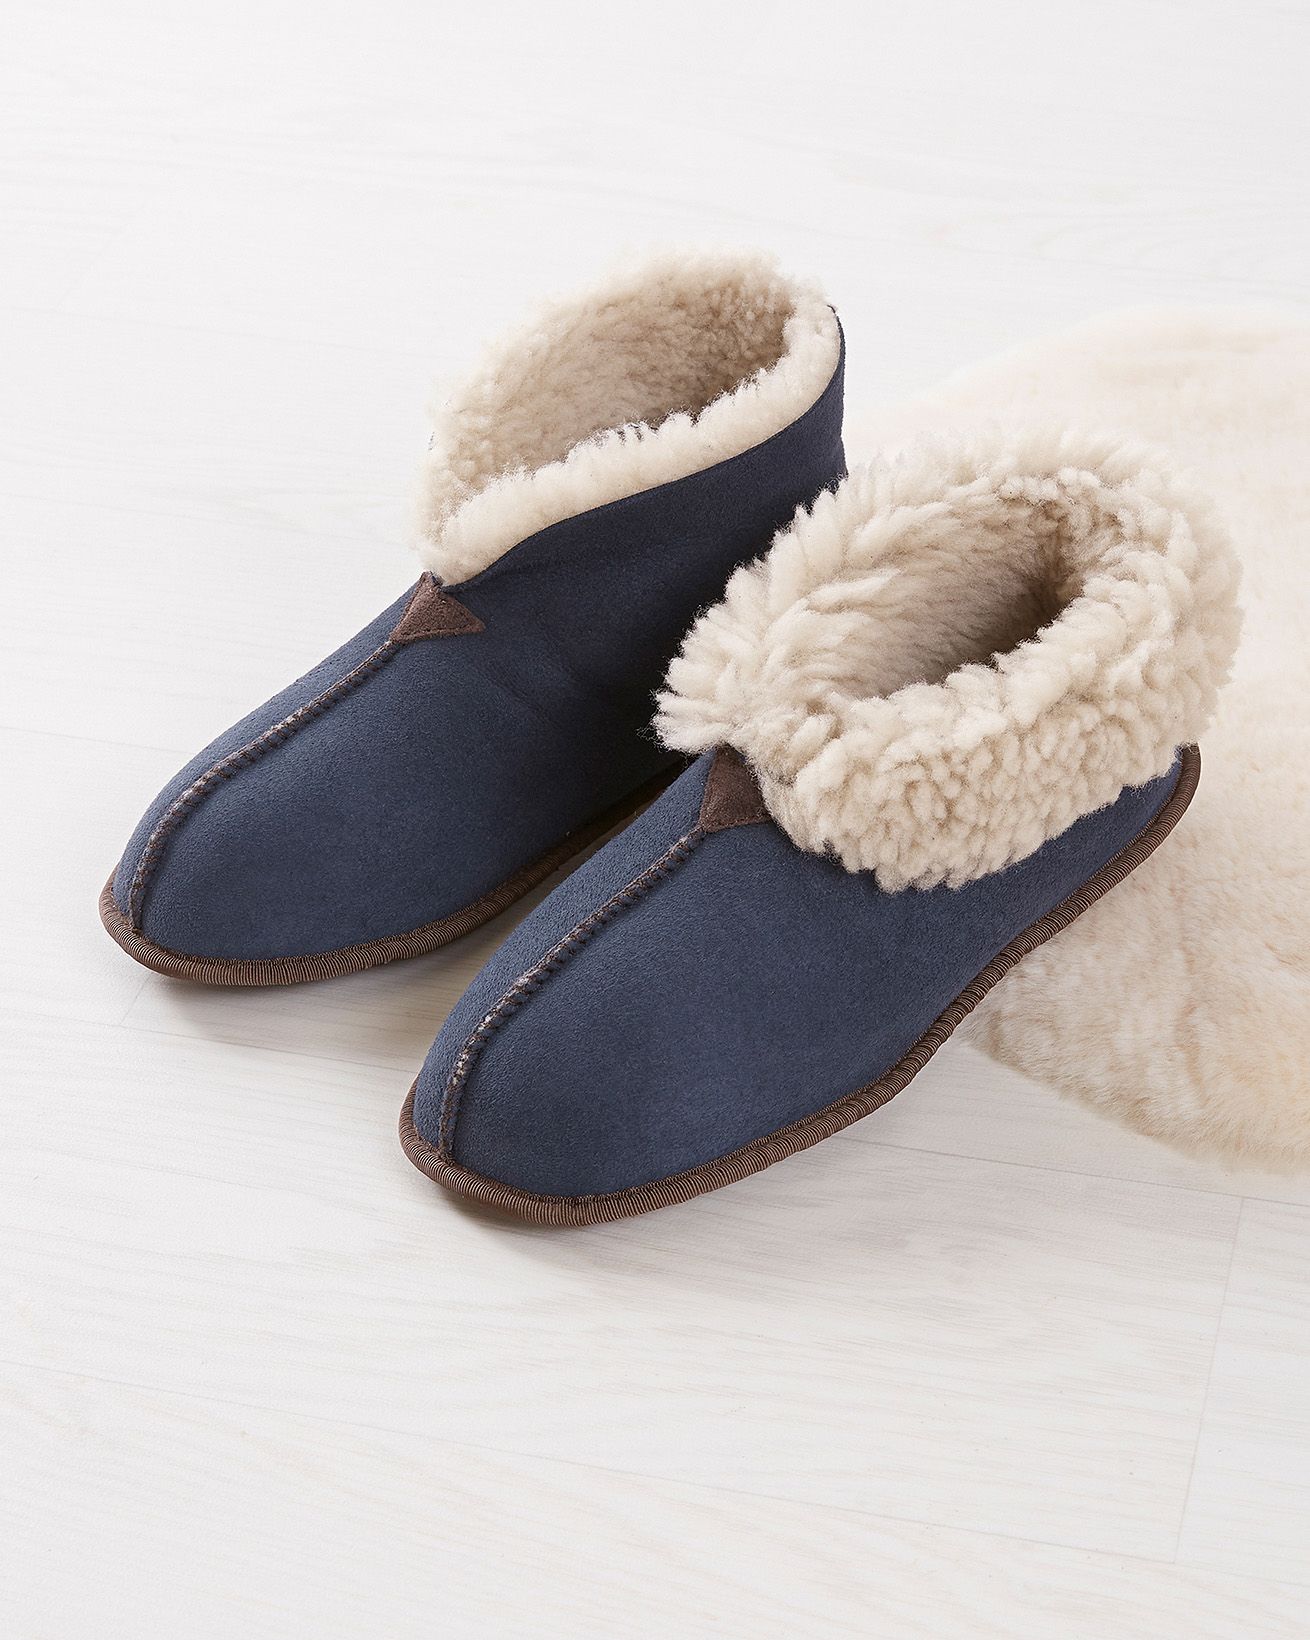 Ladies Soft Sole Bootee Slippers 